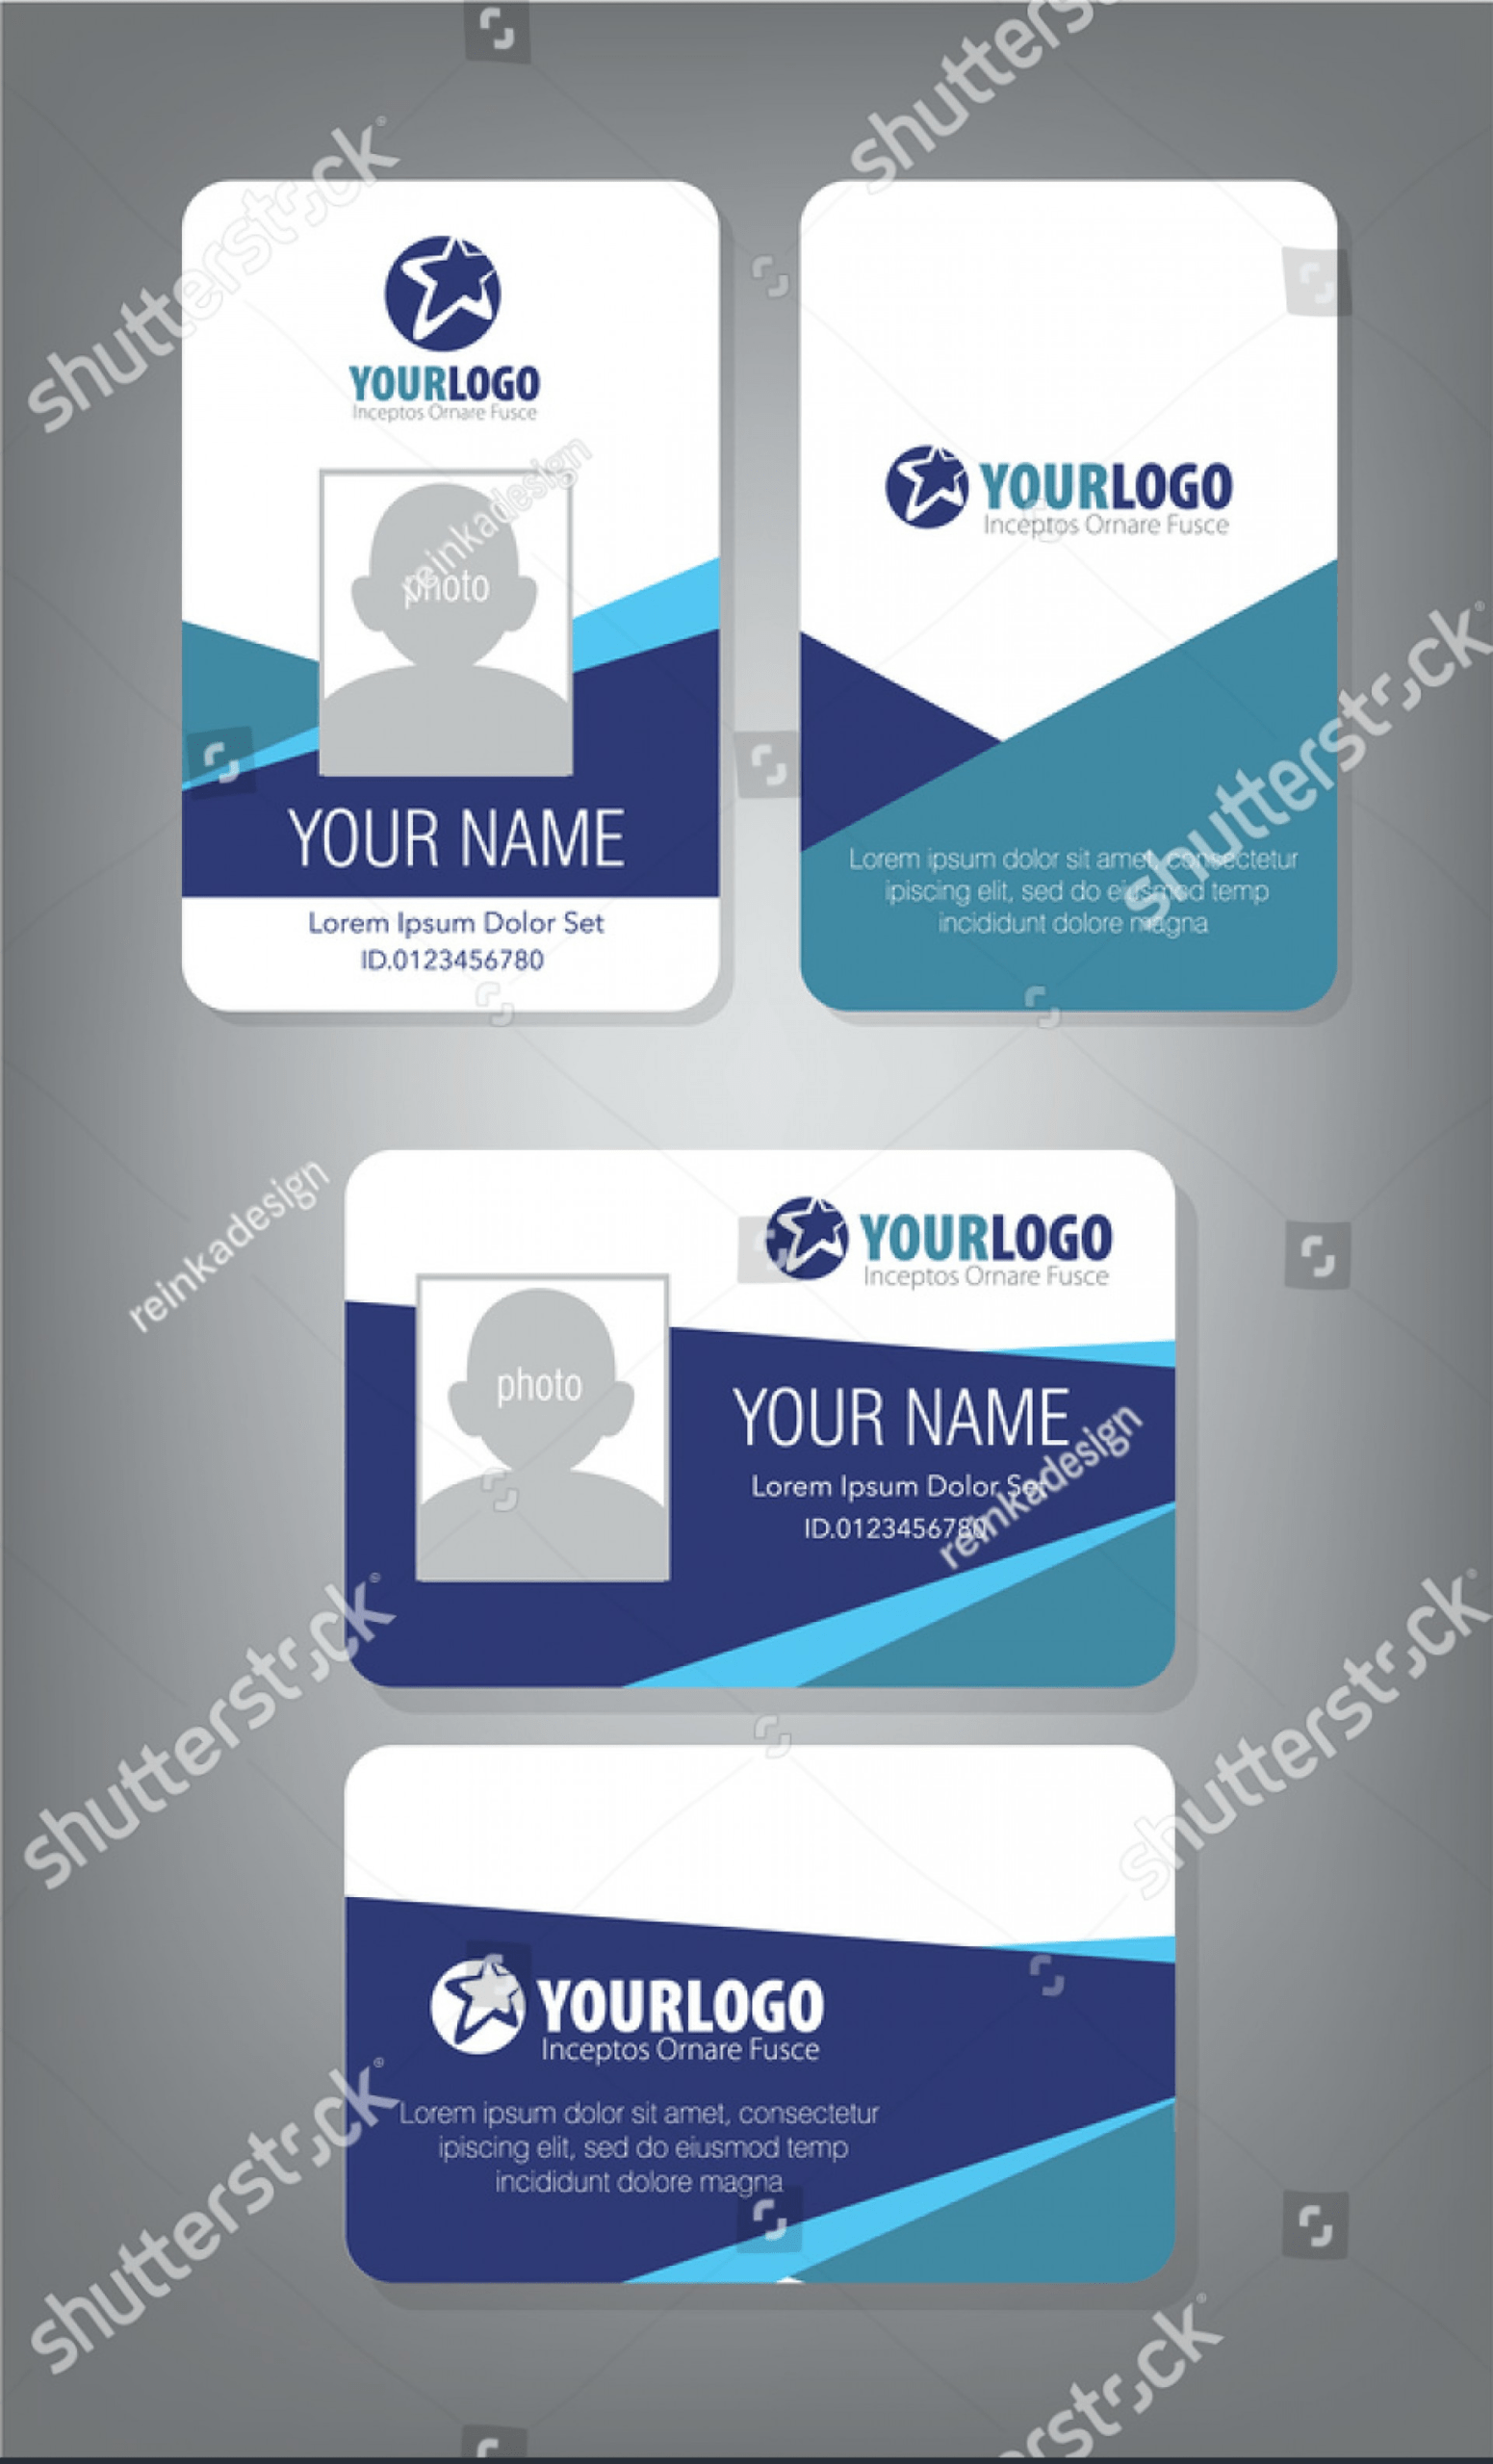 032 Template Ideas Netherlands Id Card Psd Photoshop Within Portrait Id Card Template